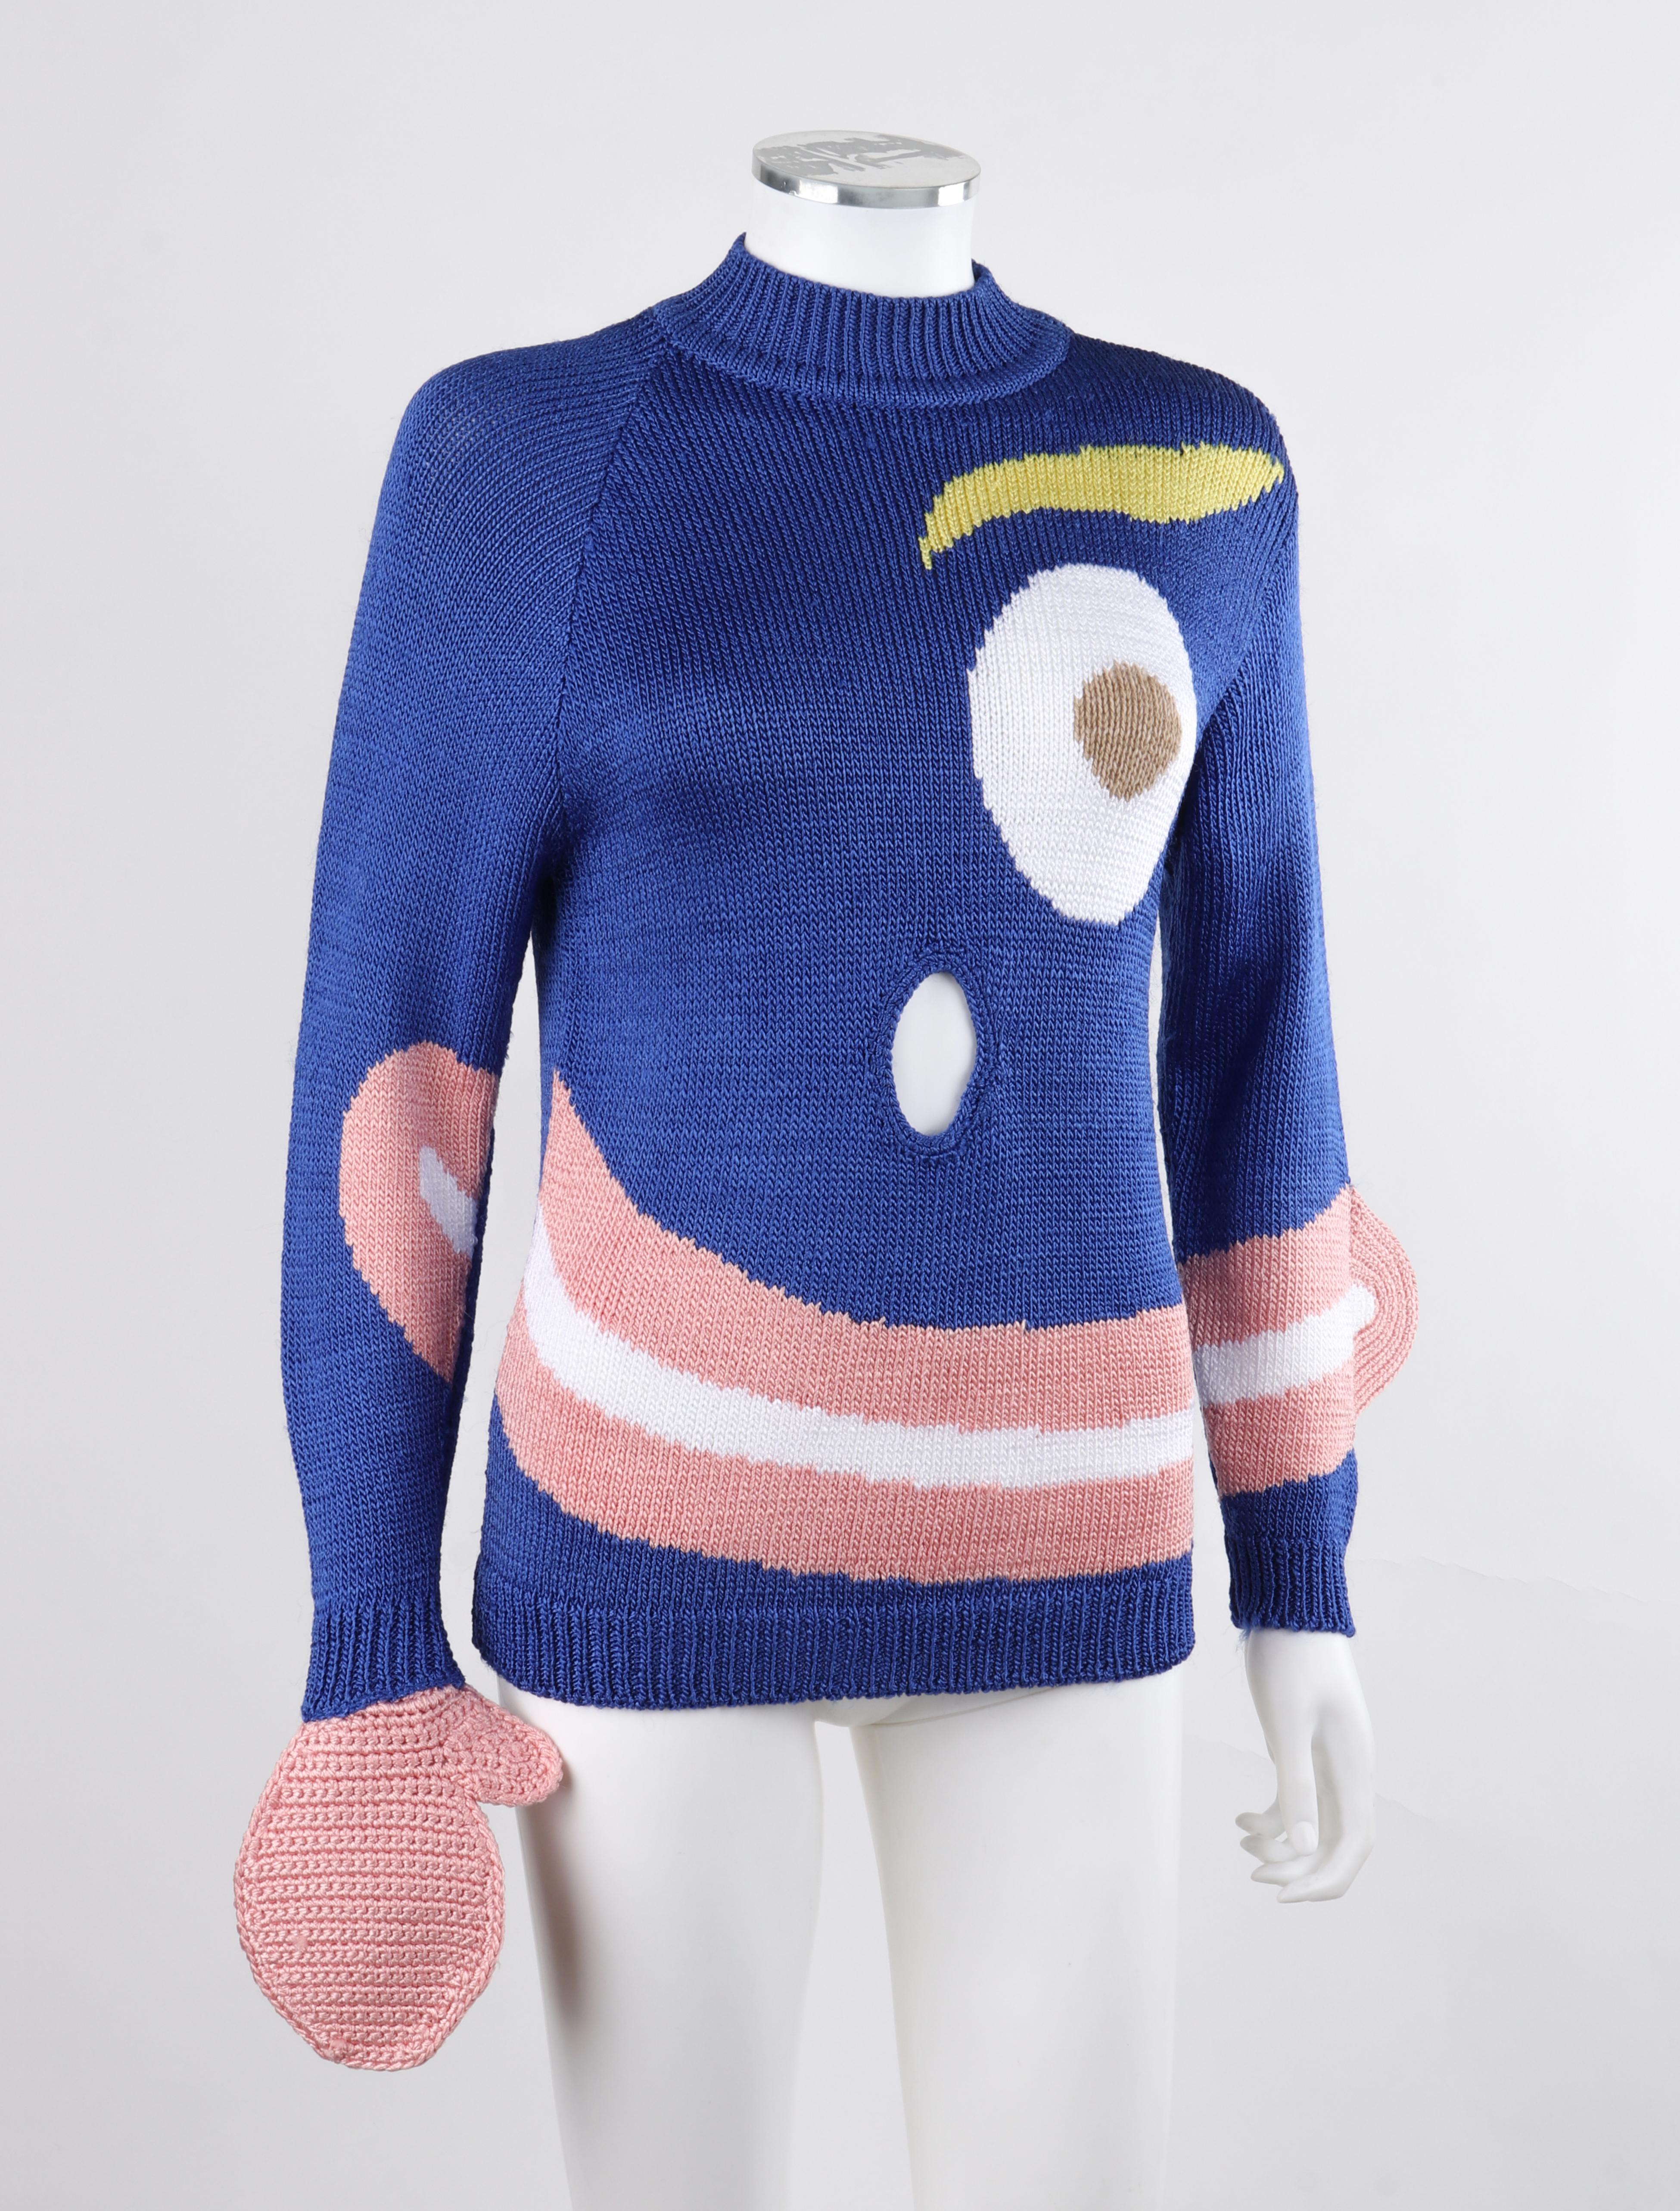 SURVIVAL OF THE FASHIONEST S/S 2020 Pull-over en tricot bleu Smiley Face Pull-over Top S en vente 1